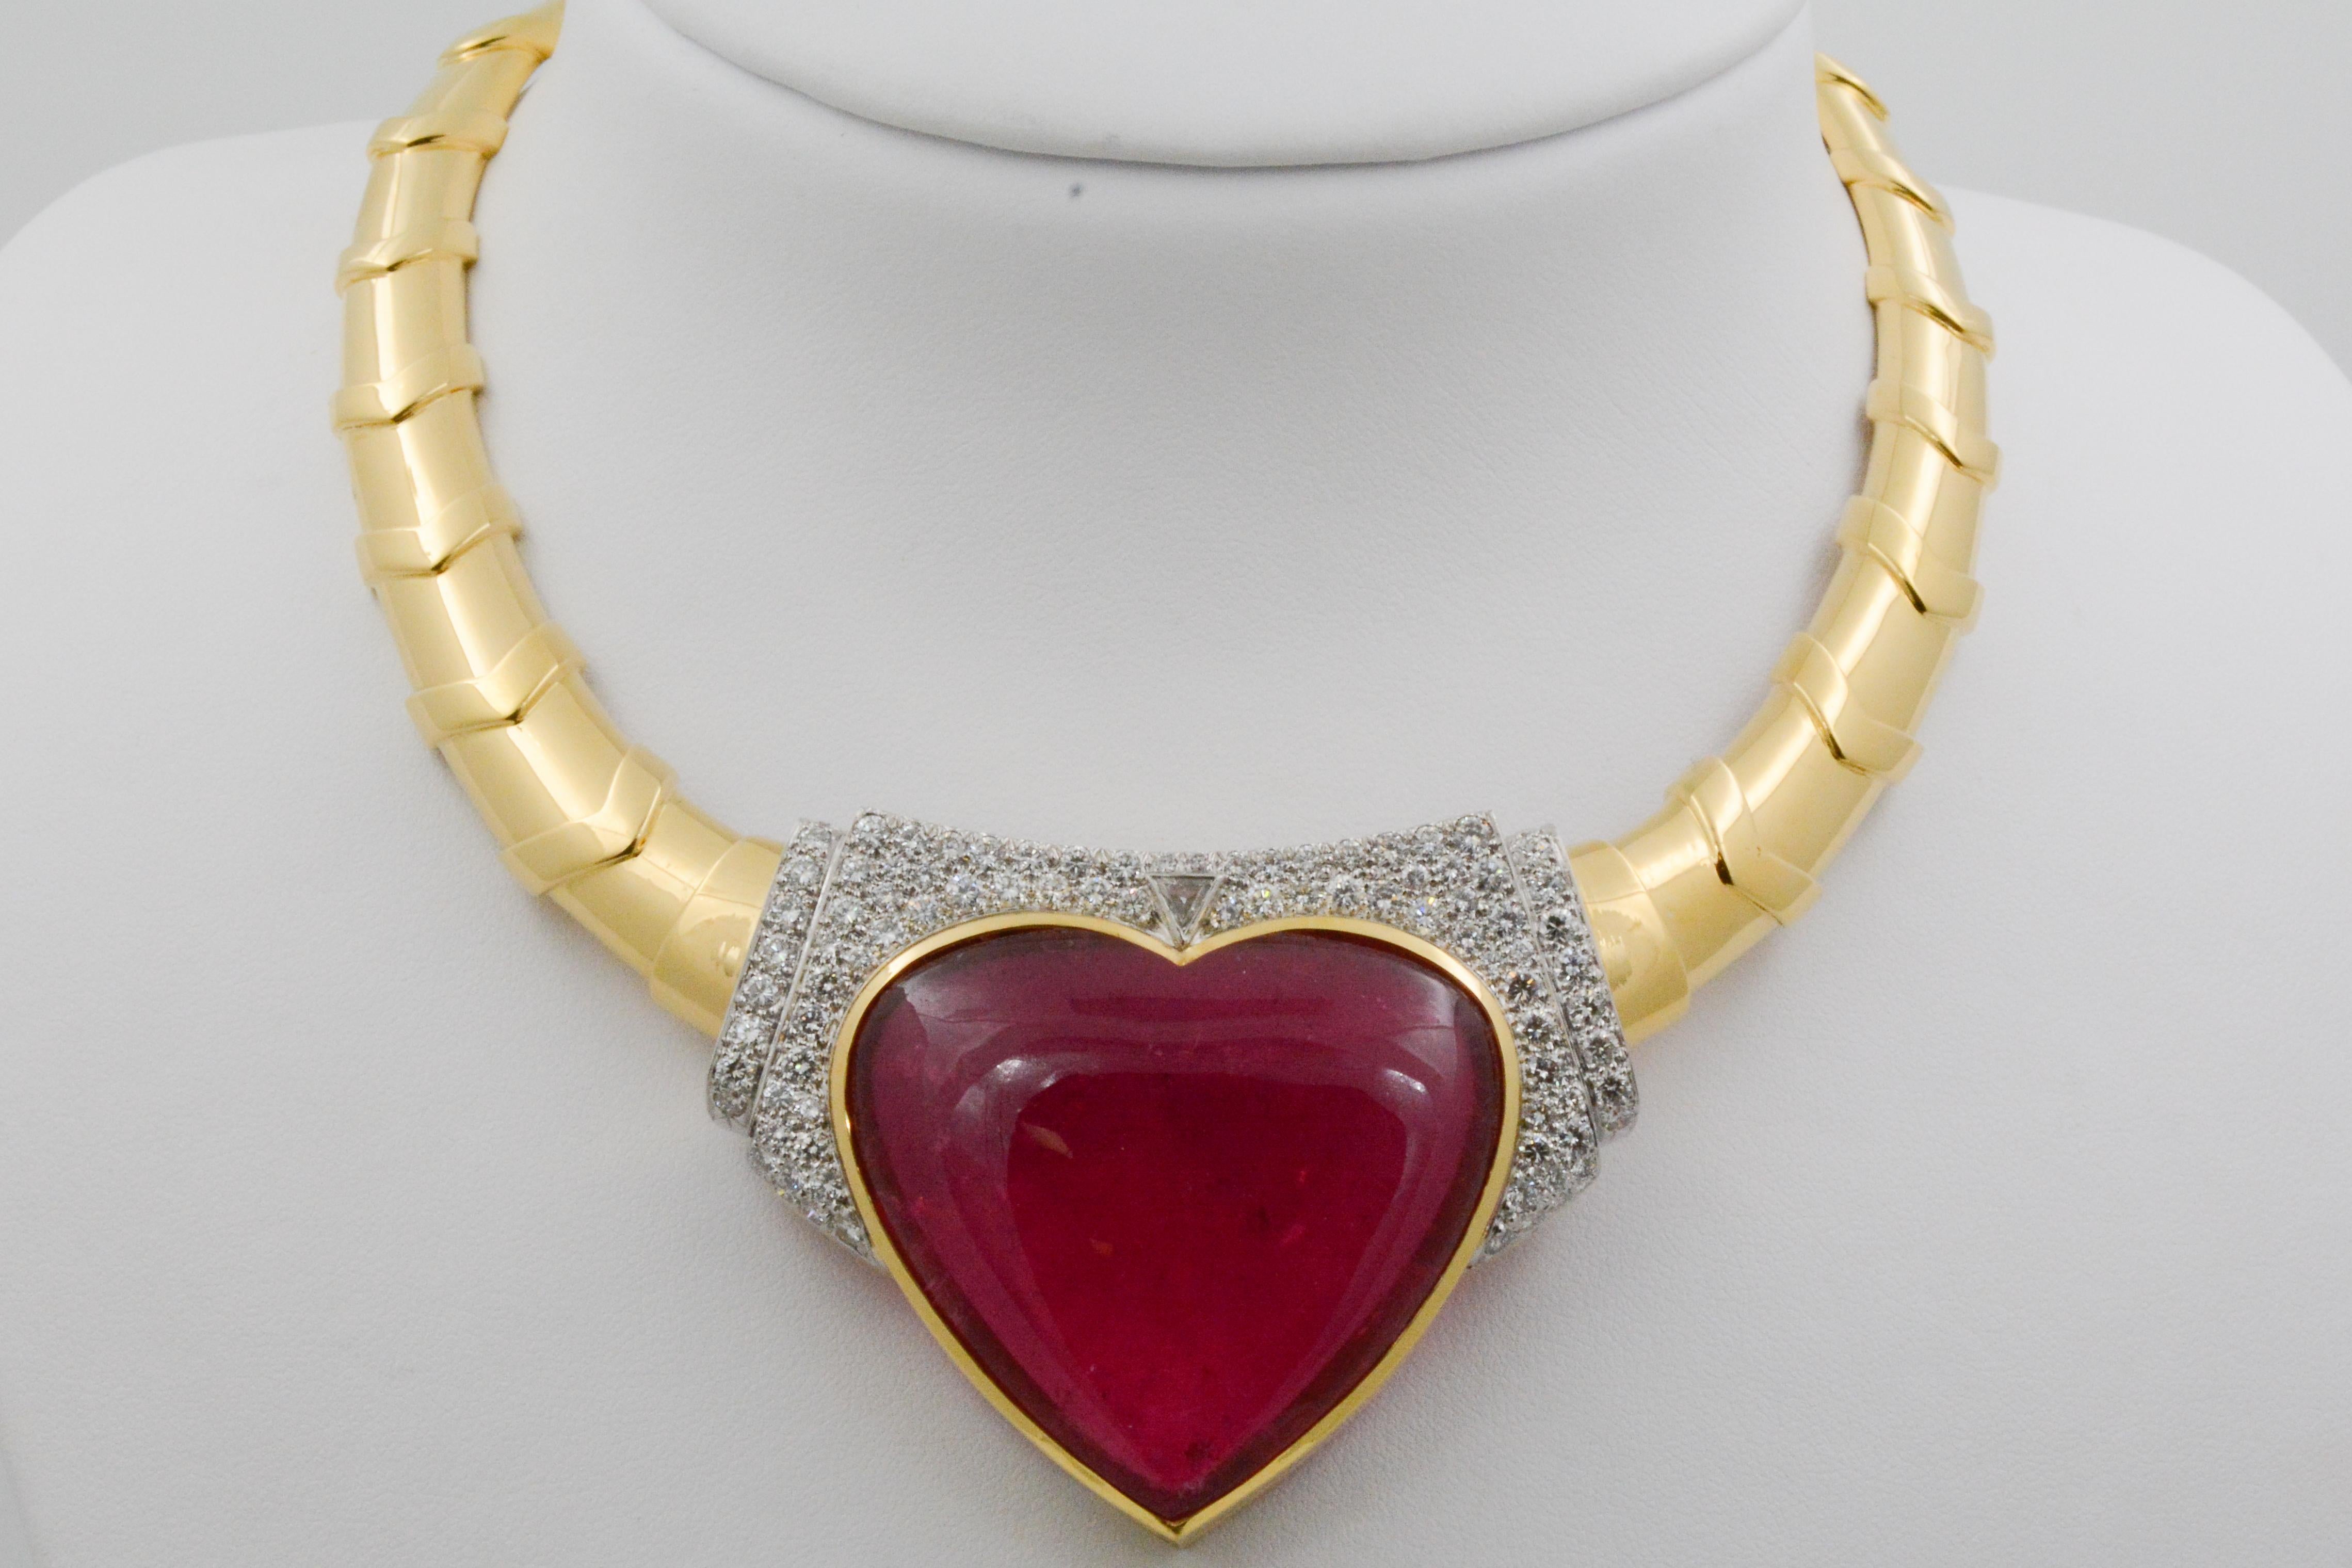 Presented here is an extraordinary and unique collar necklace from David Webb. David Webb is the quintessential American jeweler of exceedingly modern jewelry. Driven by art, design and bold pieces this state of the art necklace embodies David